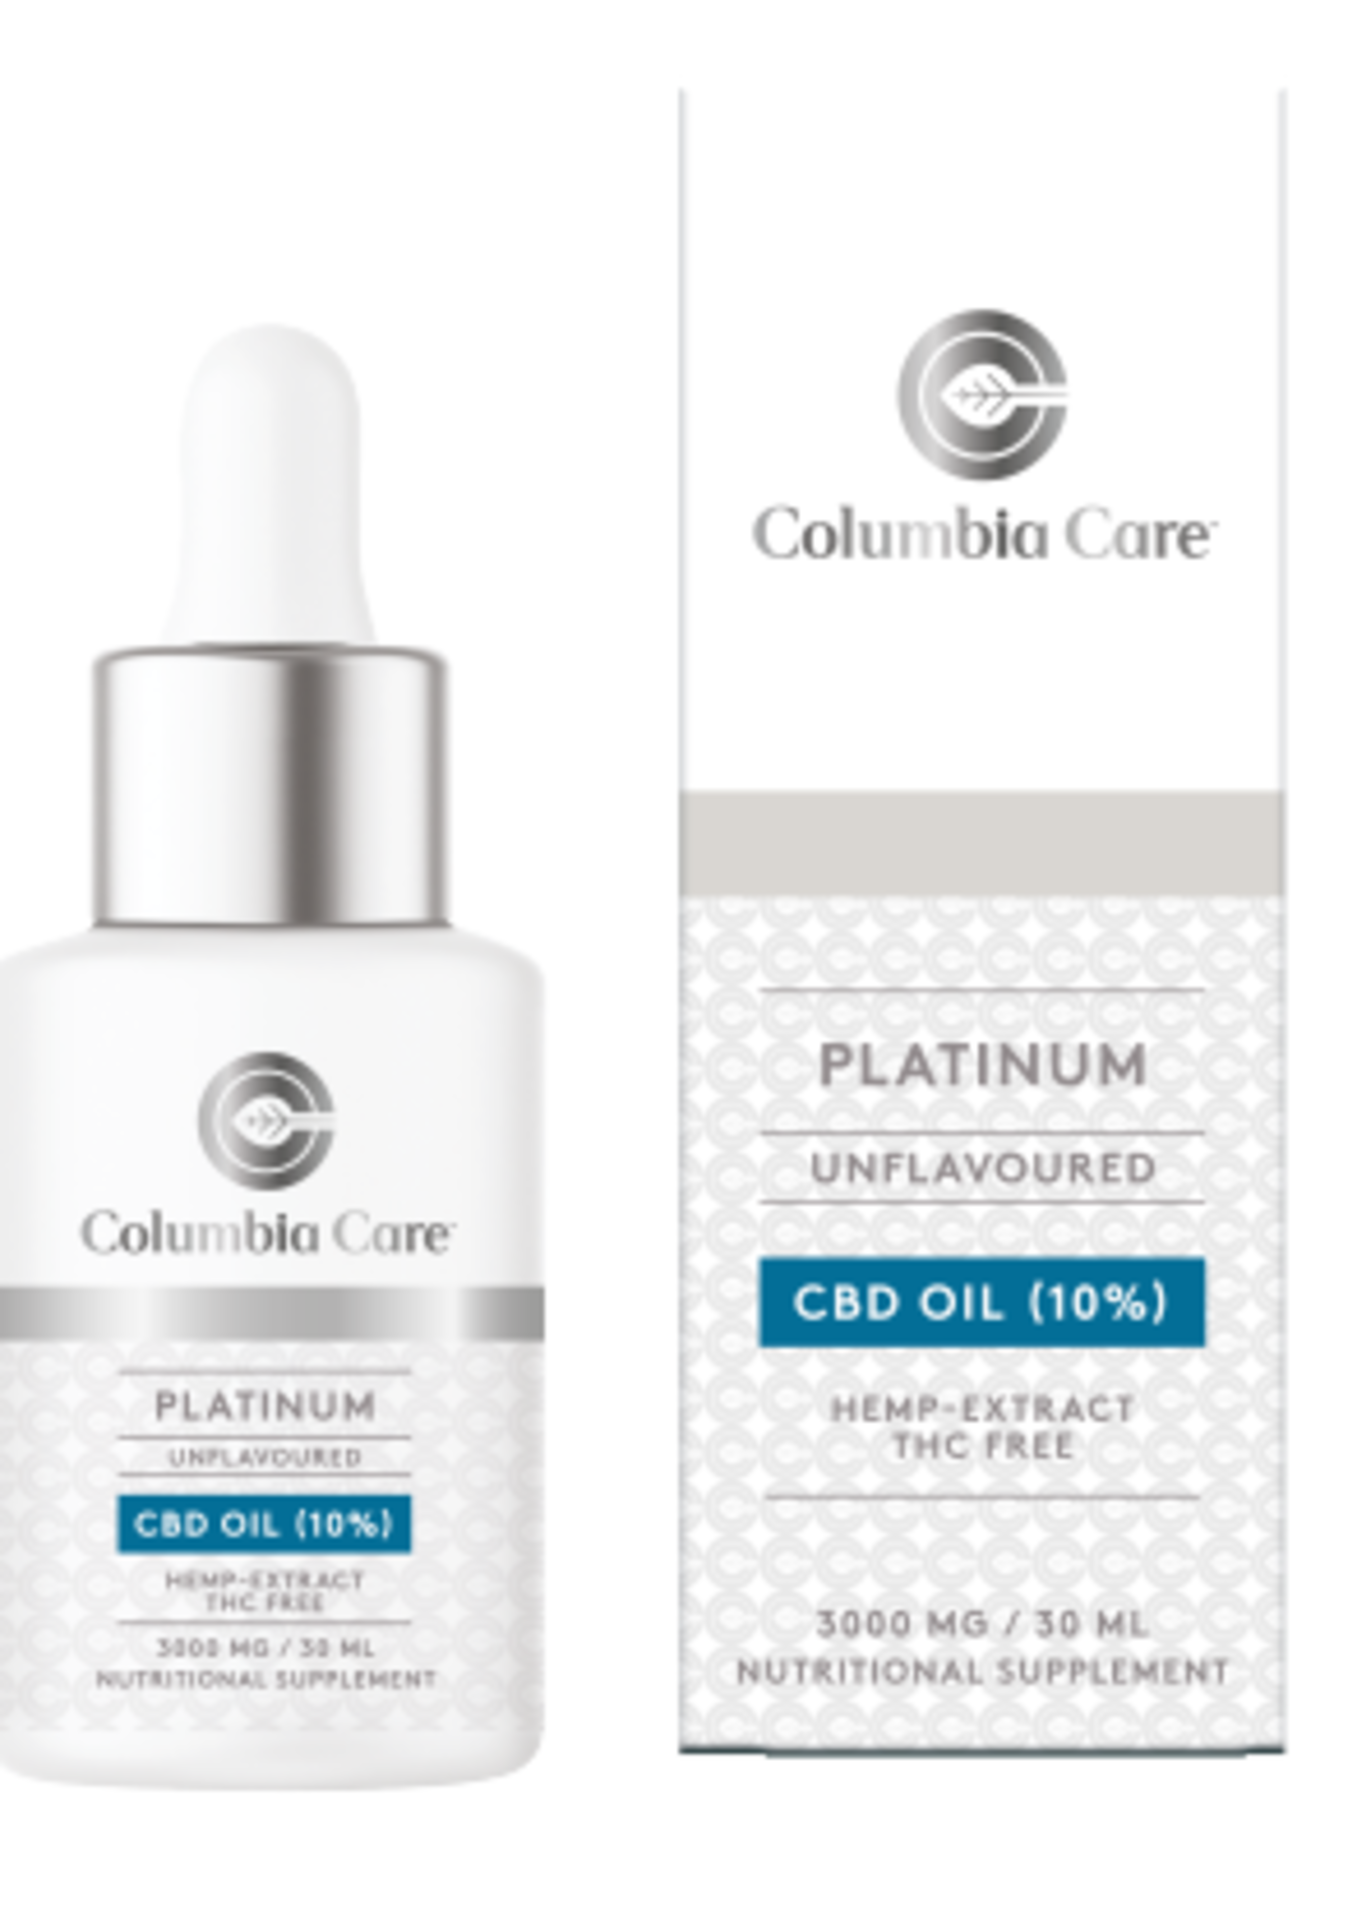 5 x Brand New Columbia Care Platinum Unflavoured Flavored Tincture 30ml 3000mg. Columbia Care, a